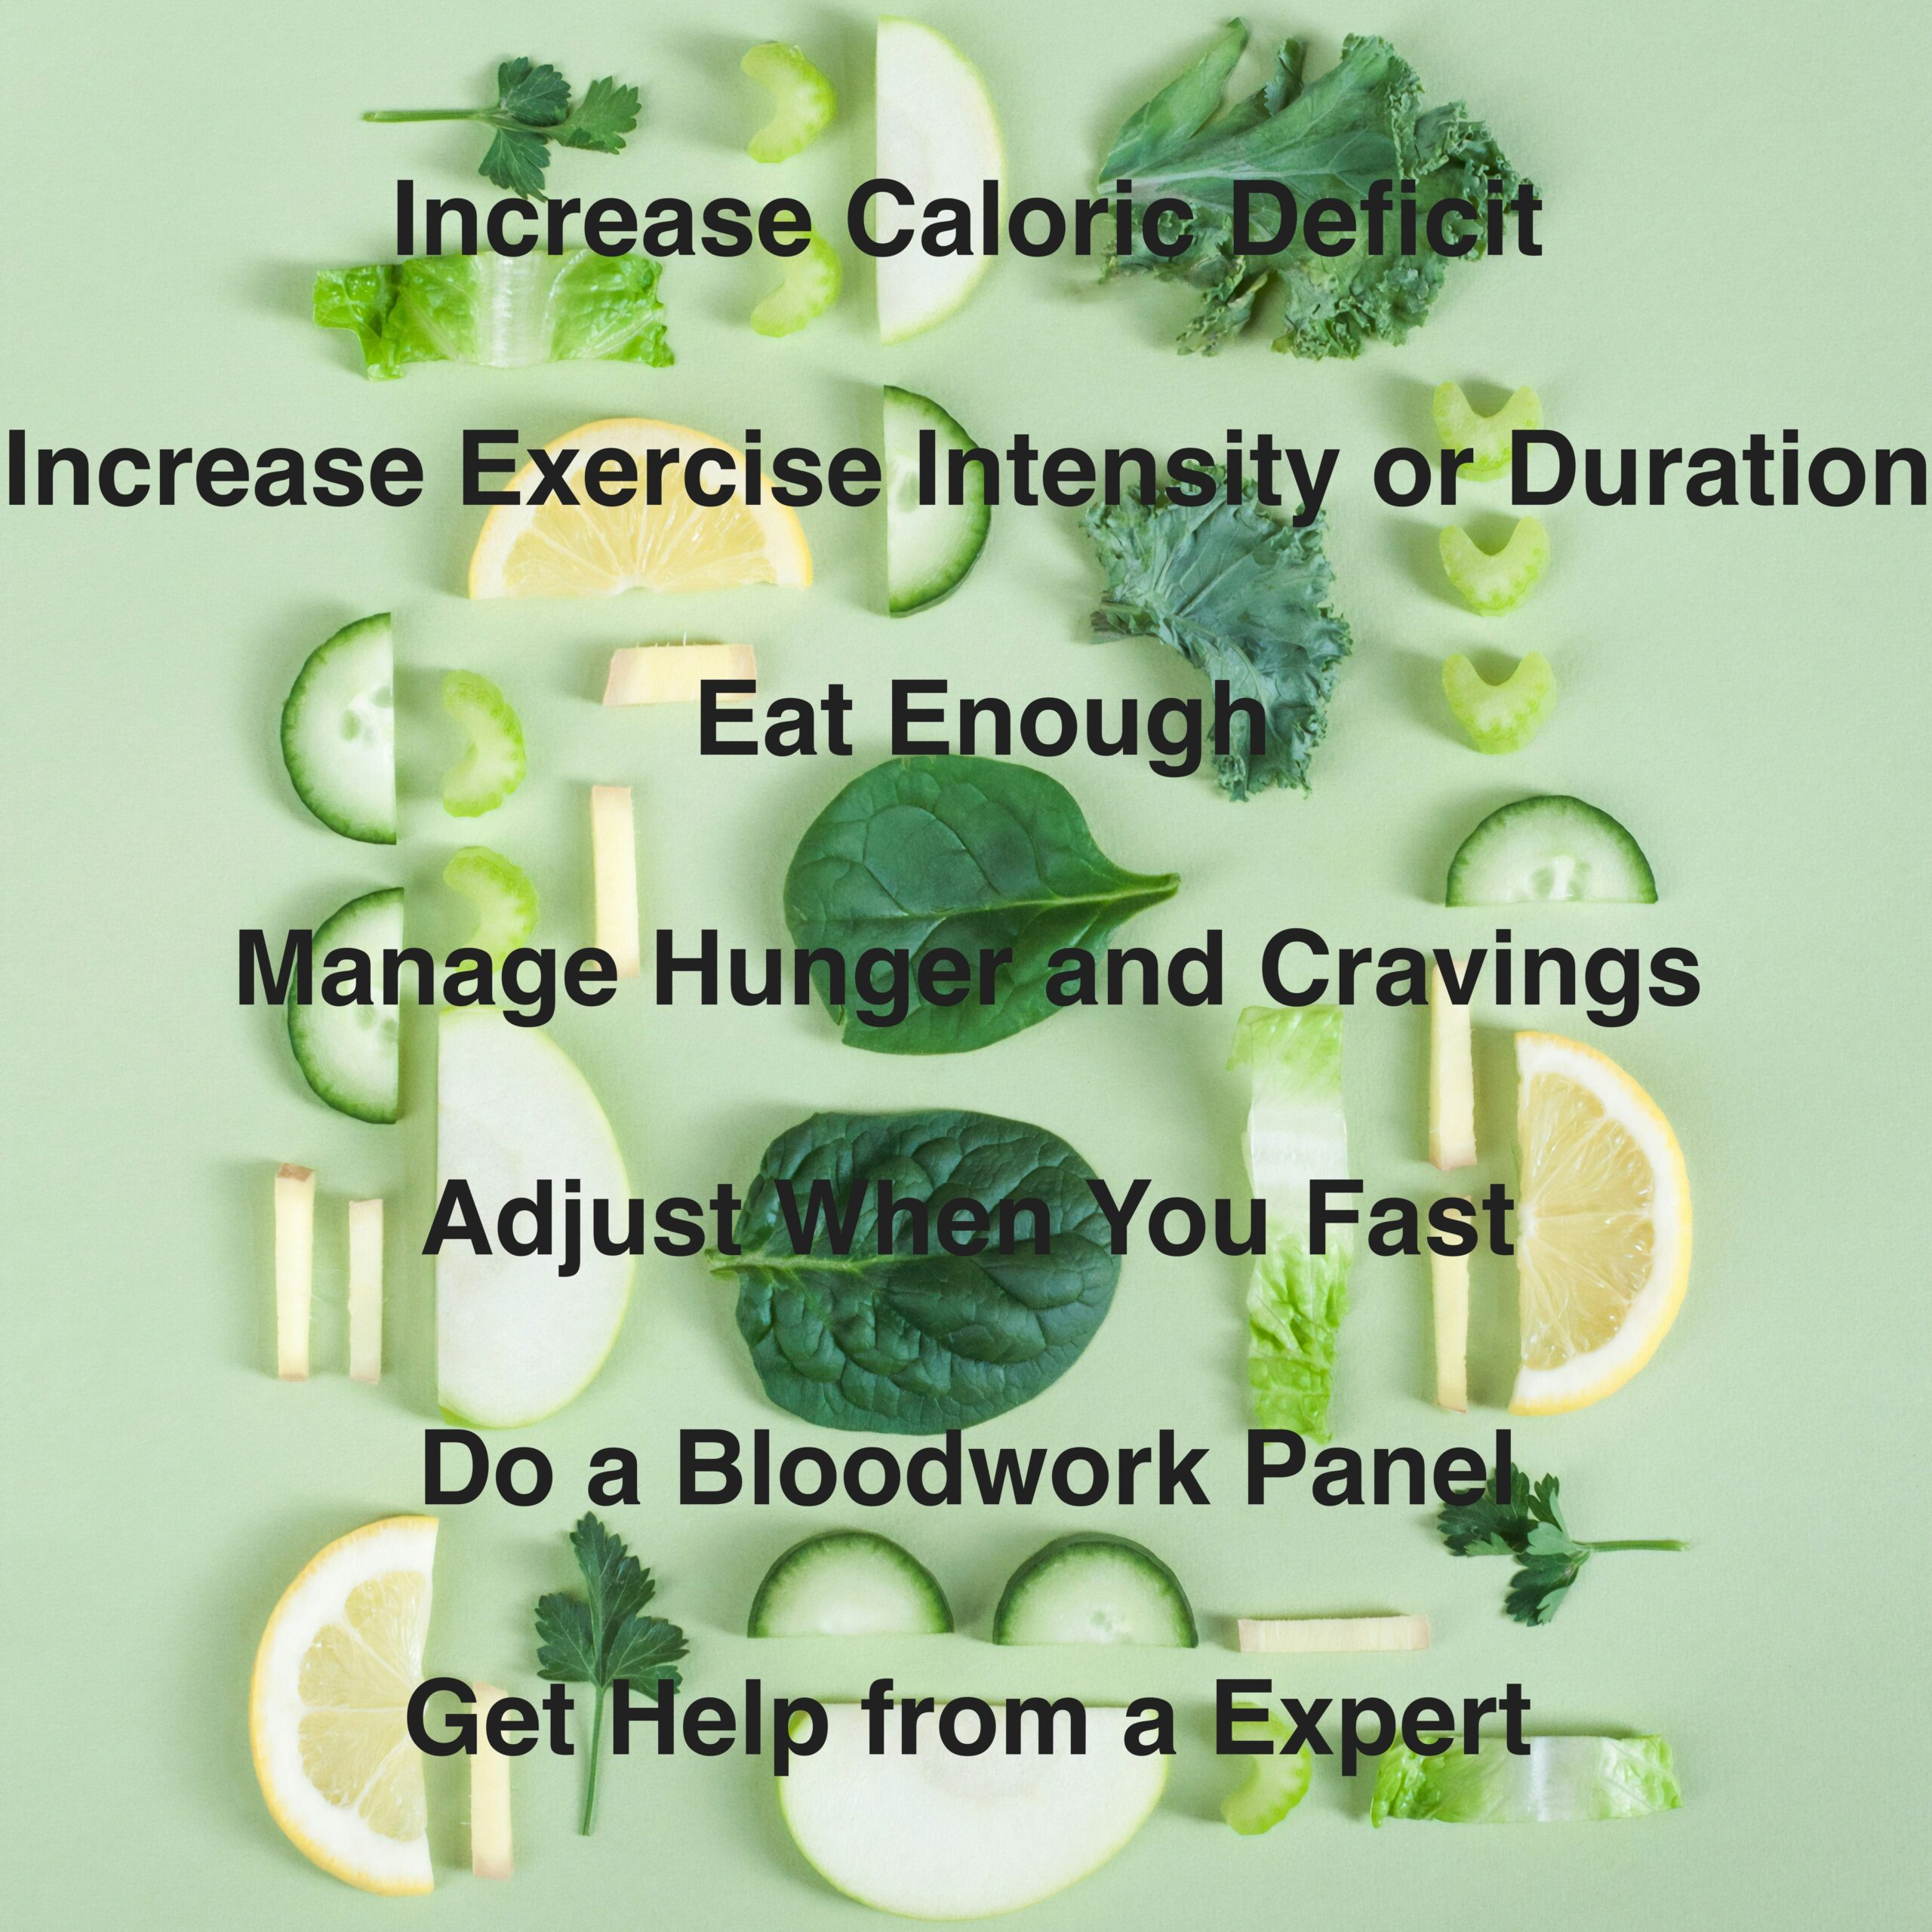 A Pic of green veggies cut with the text above: increase caloric deficit, increase exercice intensity or duration, eat enough, manage hunger and cravings, adjust your fast, do a bloodwork panel, get help from an expert